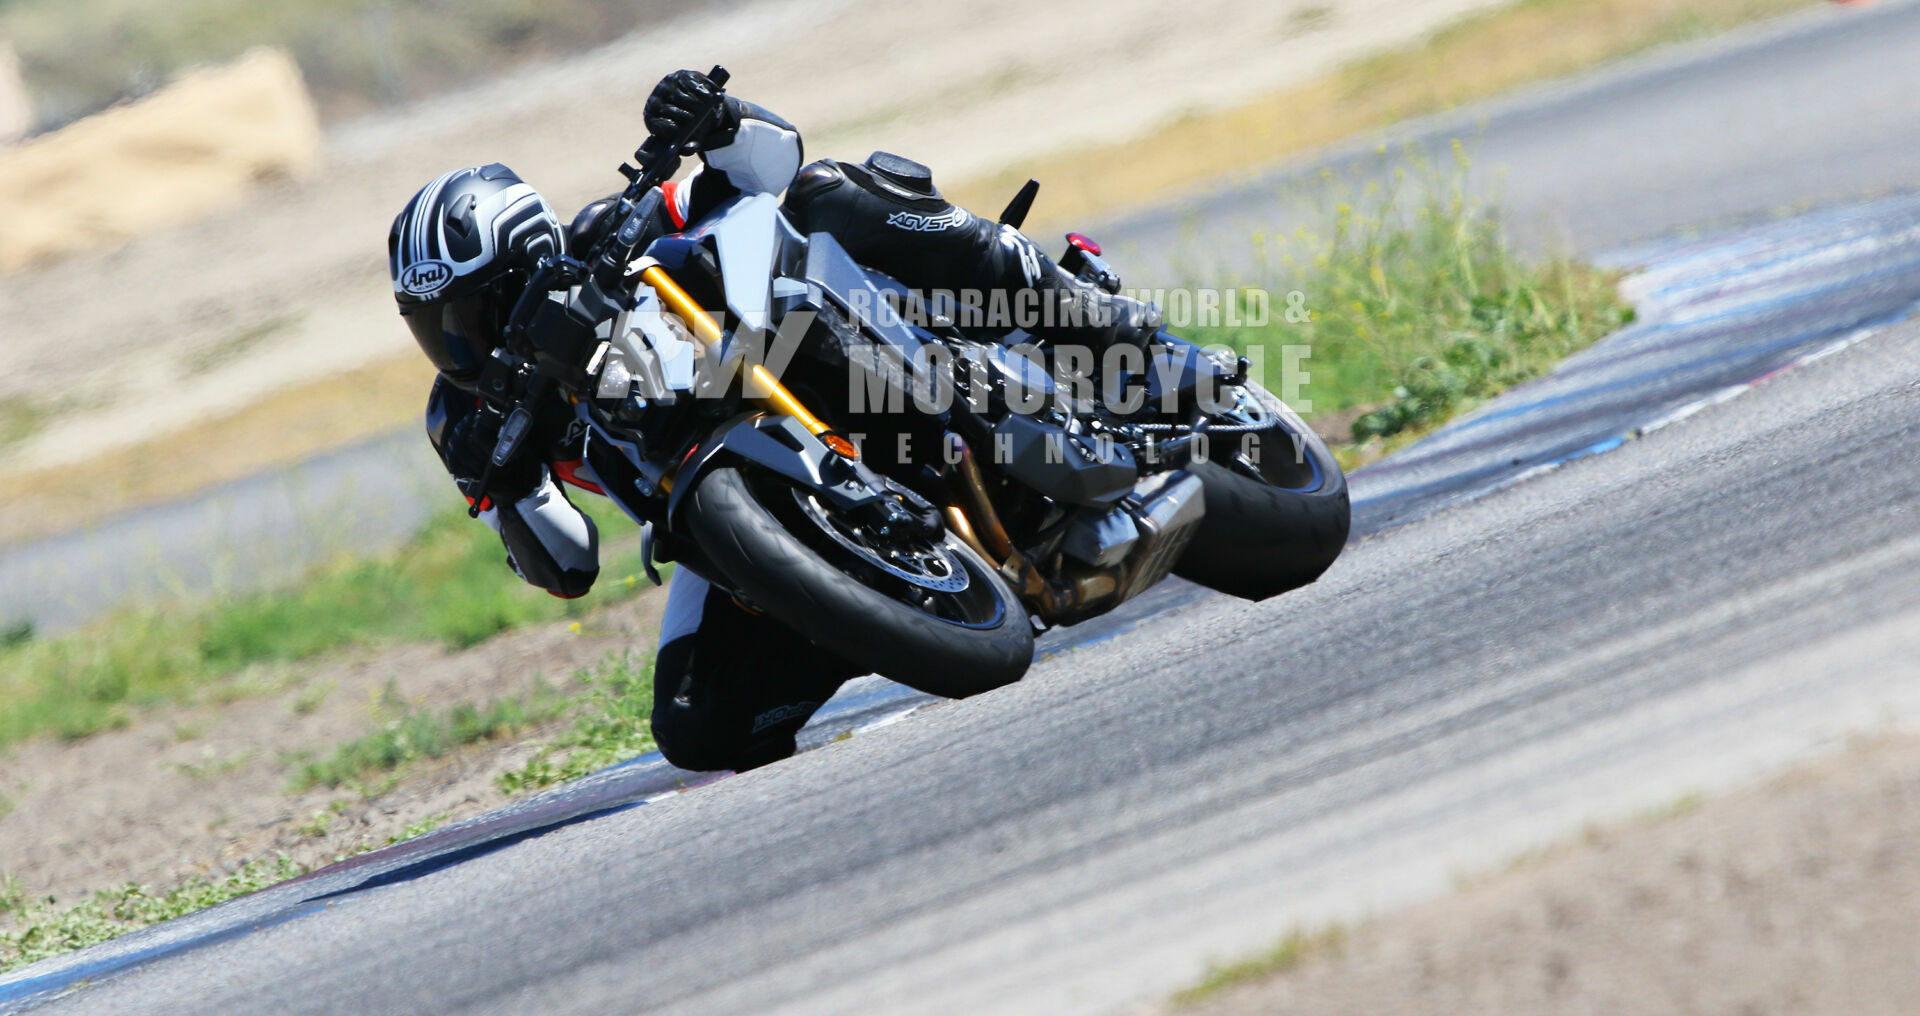 Big torque and easy handling make the Suzuki GSX-S1000 fun to ride at a track day. Dunlop Roadsport 2 radials provide enough grip for knee-down cornering, and deliver decent street mileage. Photos by Caliphotography.